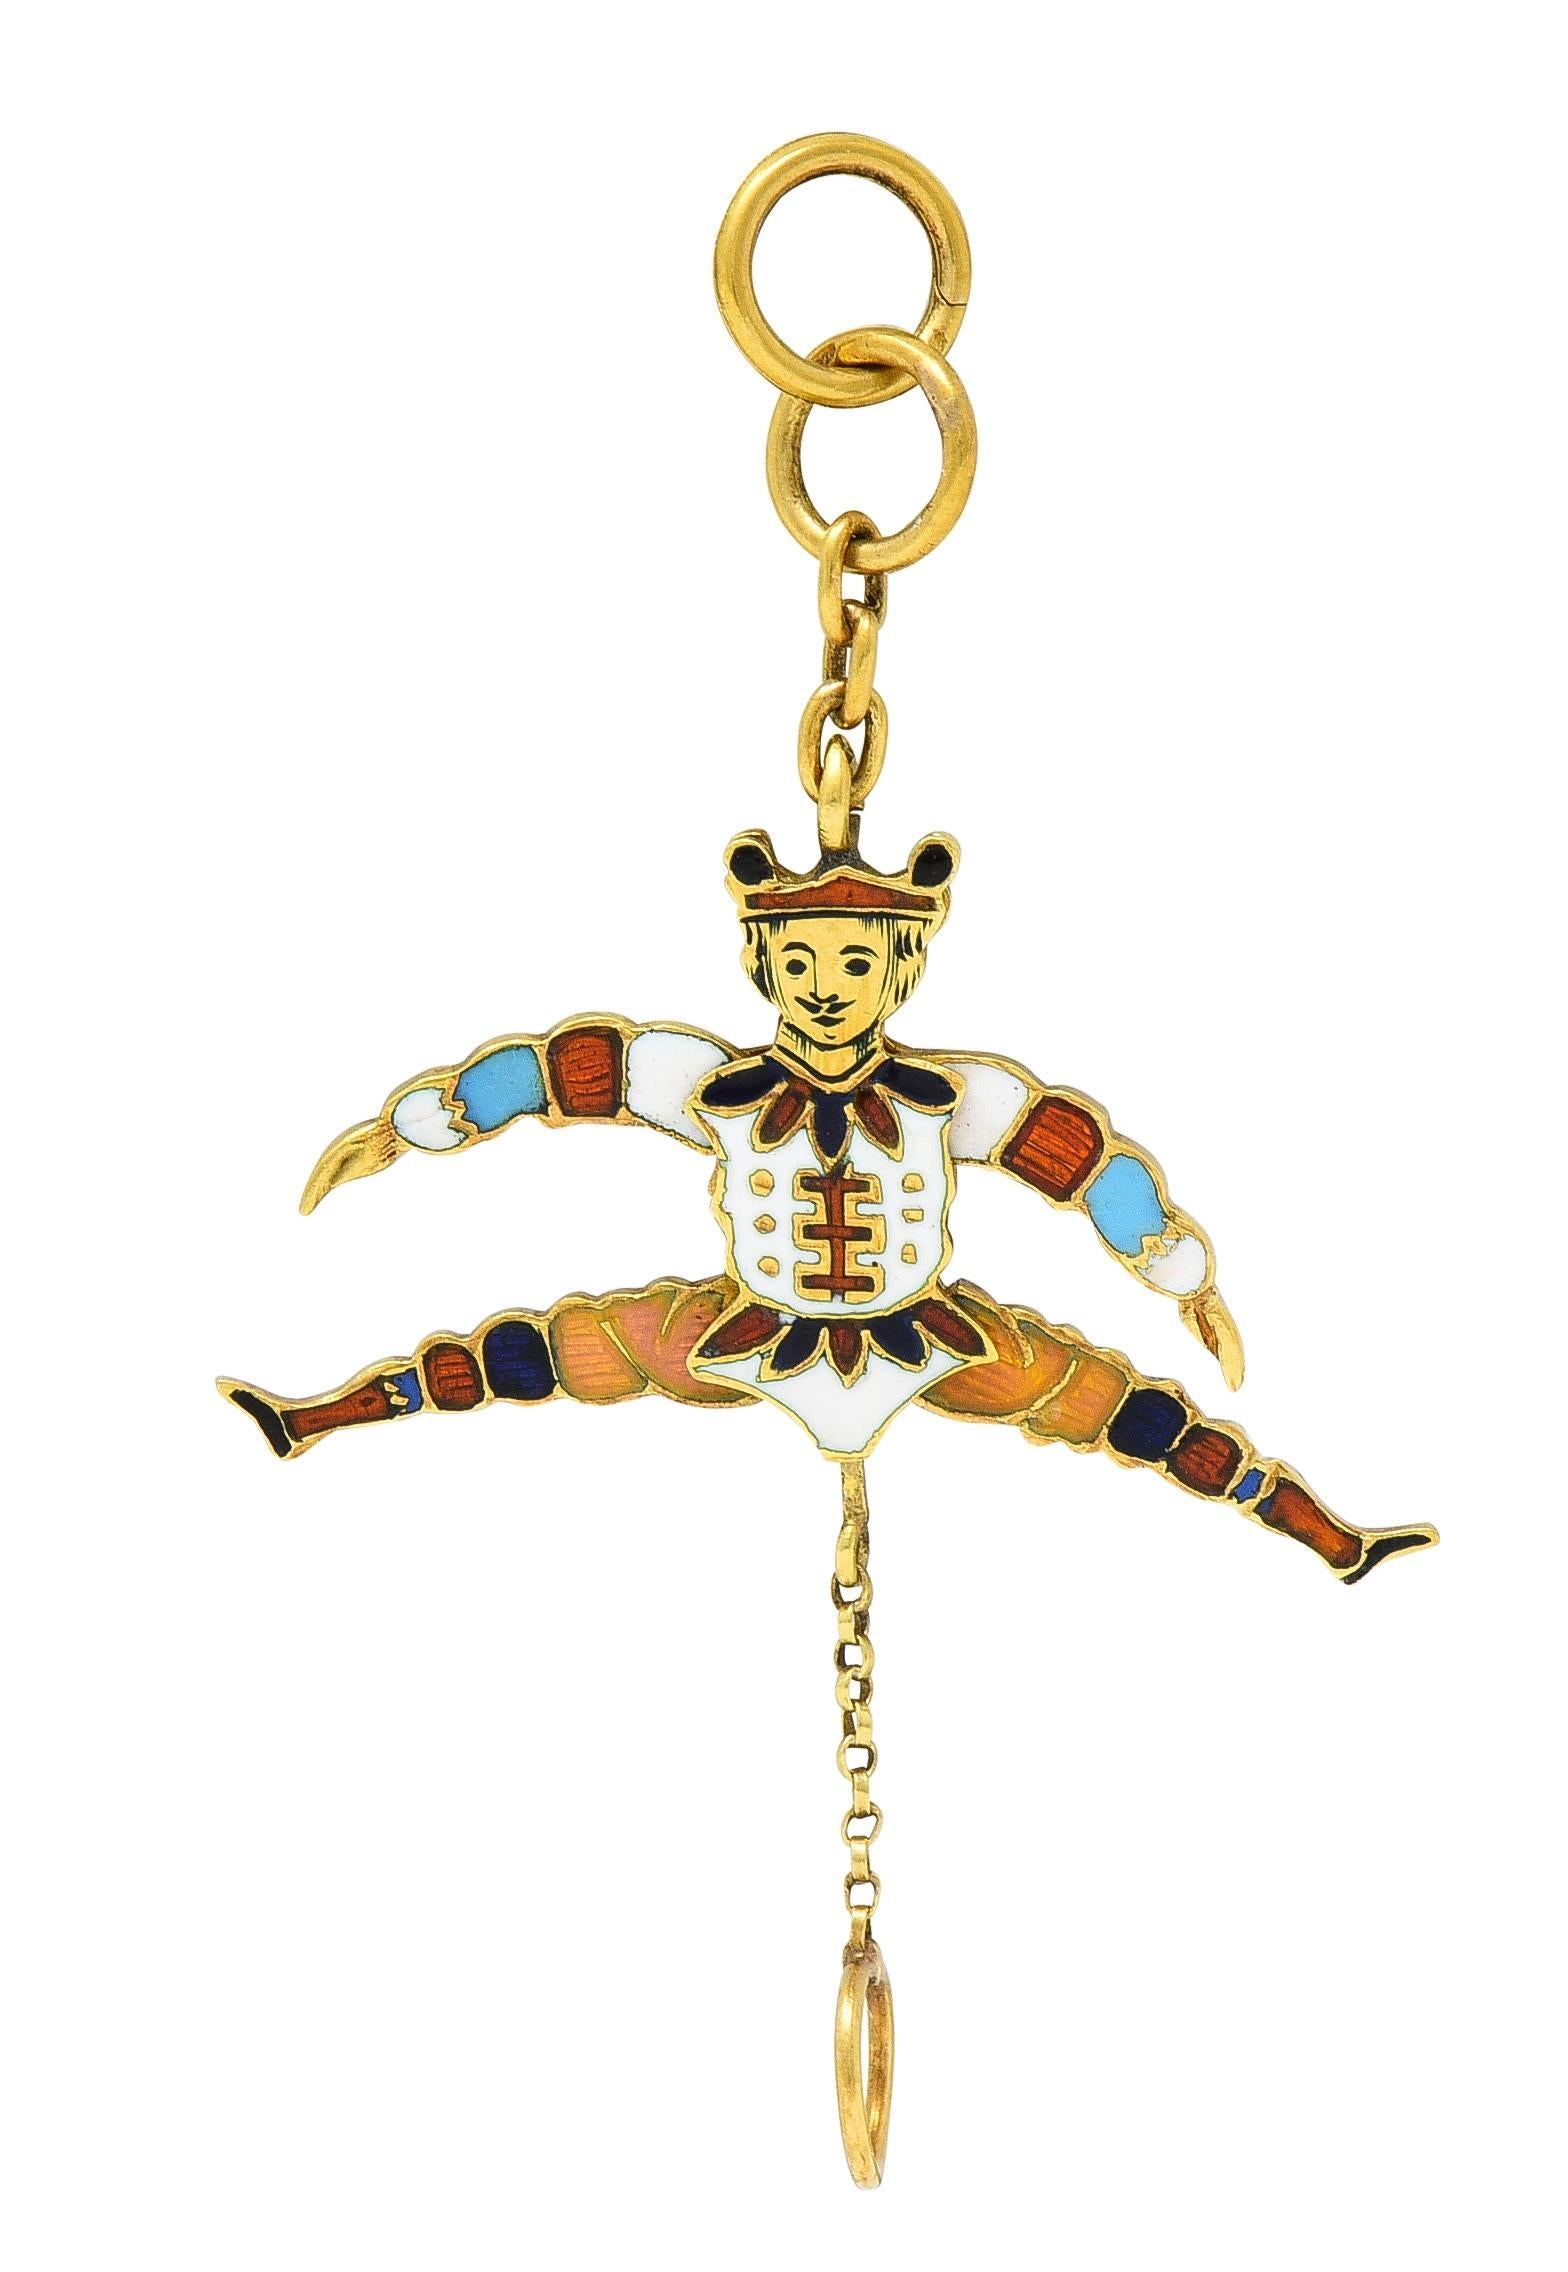 Designed as a stylized jester with animated arms and legs via pull chain
Featuring champlevé and basse-taille enamel throughout 
Opaque white, black, blue, pink, green with gloss finish 
Transparent orange, blue, and pink - glossed over linear